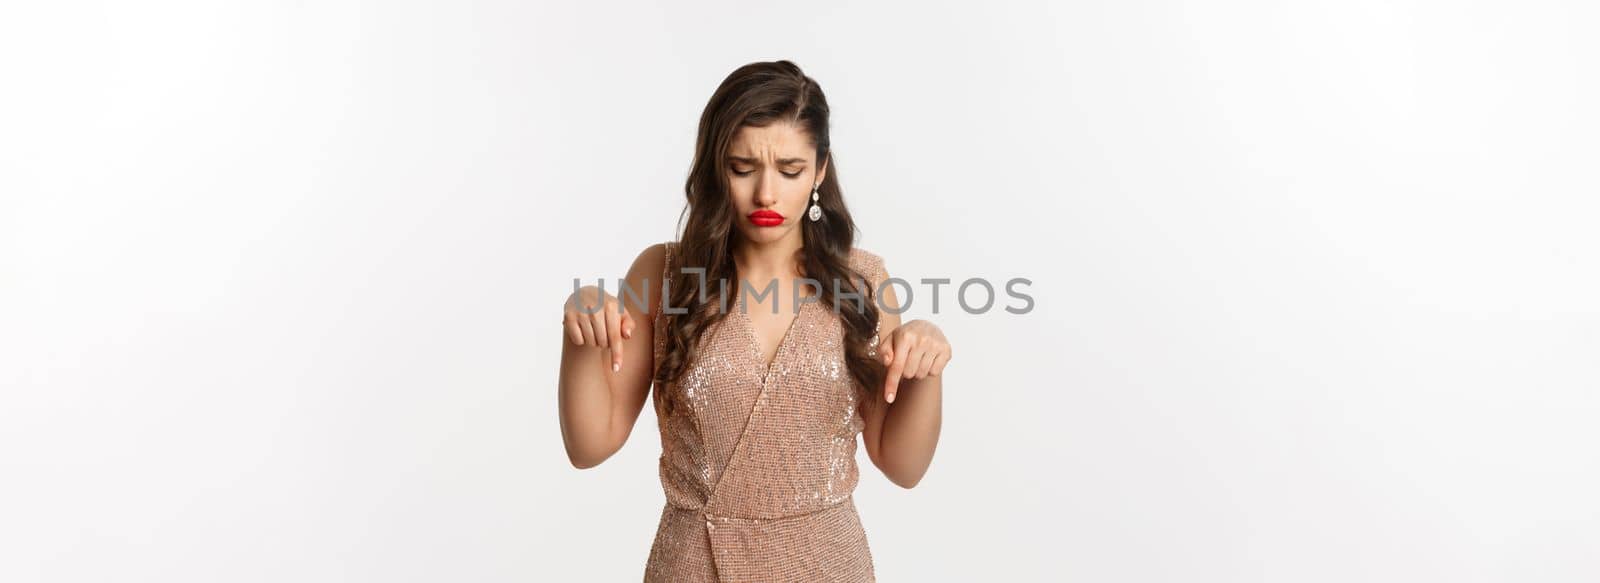 Sad beautiful girl pointing fingers down and sulking, wearing dress for christmas party, looking disappointed, standing over white background.